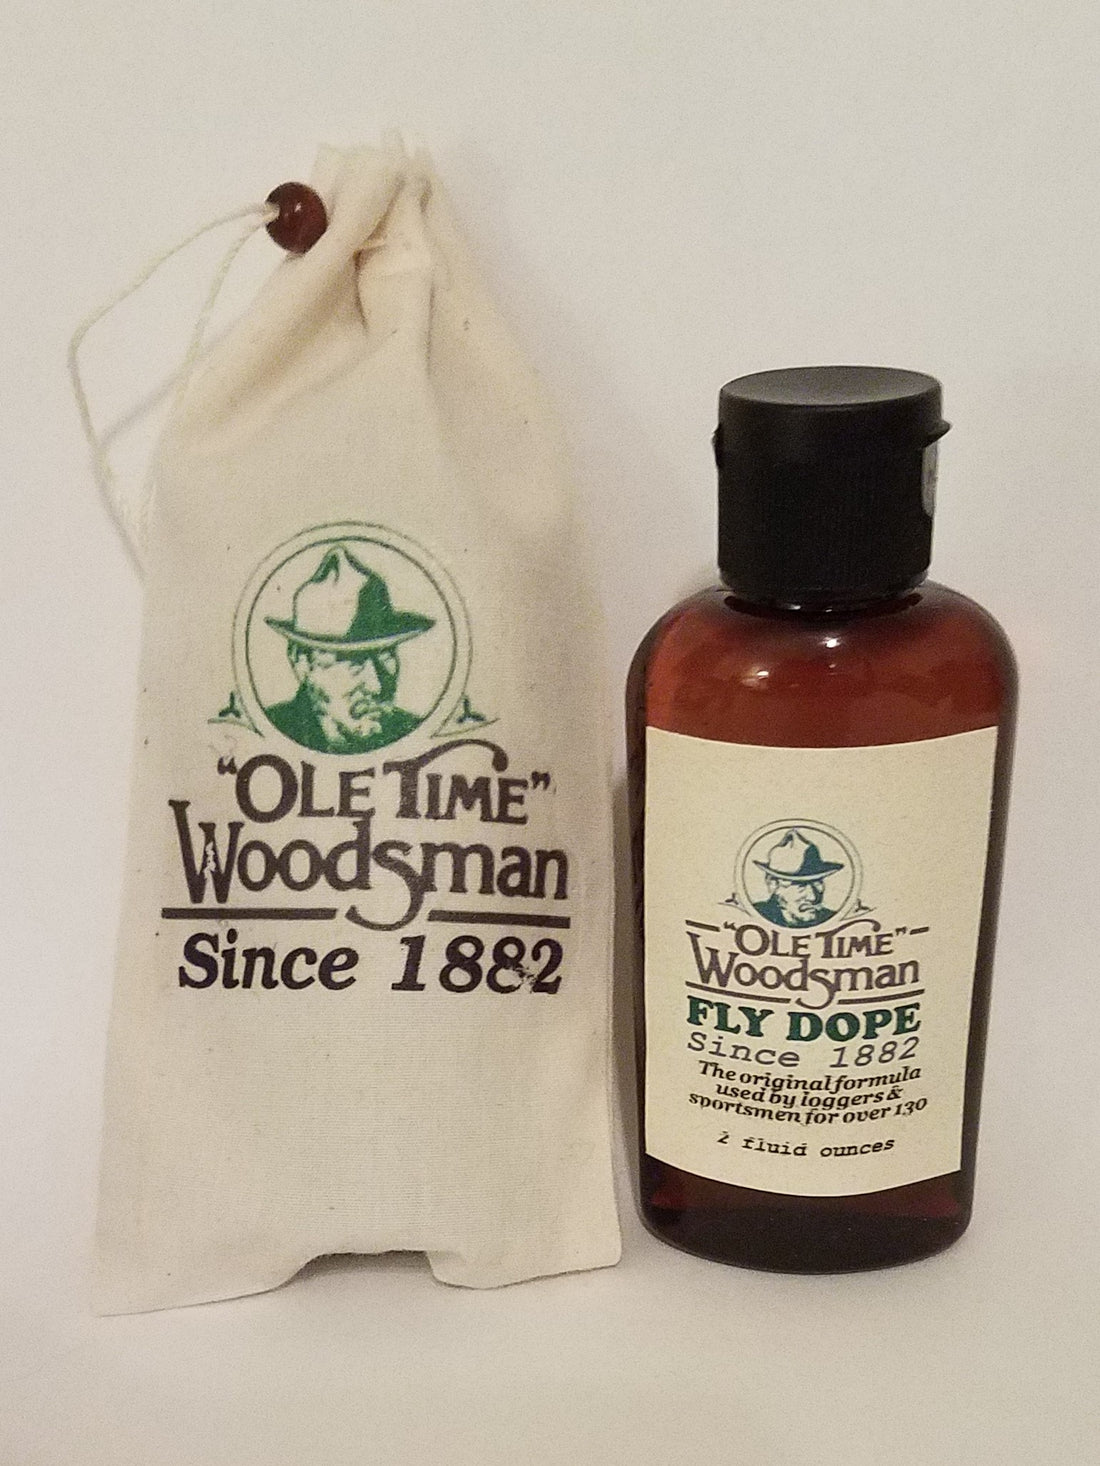 What is the best mosquito and tick repellent?  If they have not included Ole Time Woodsman Fly Dope, their study is incomplete!